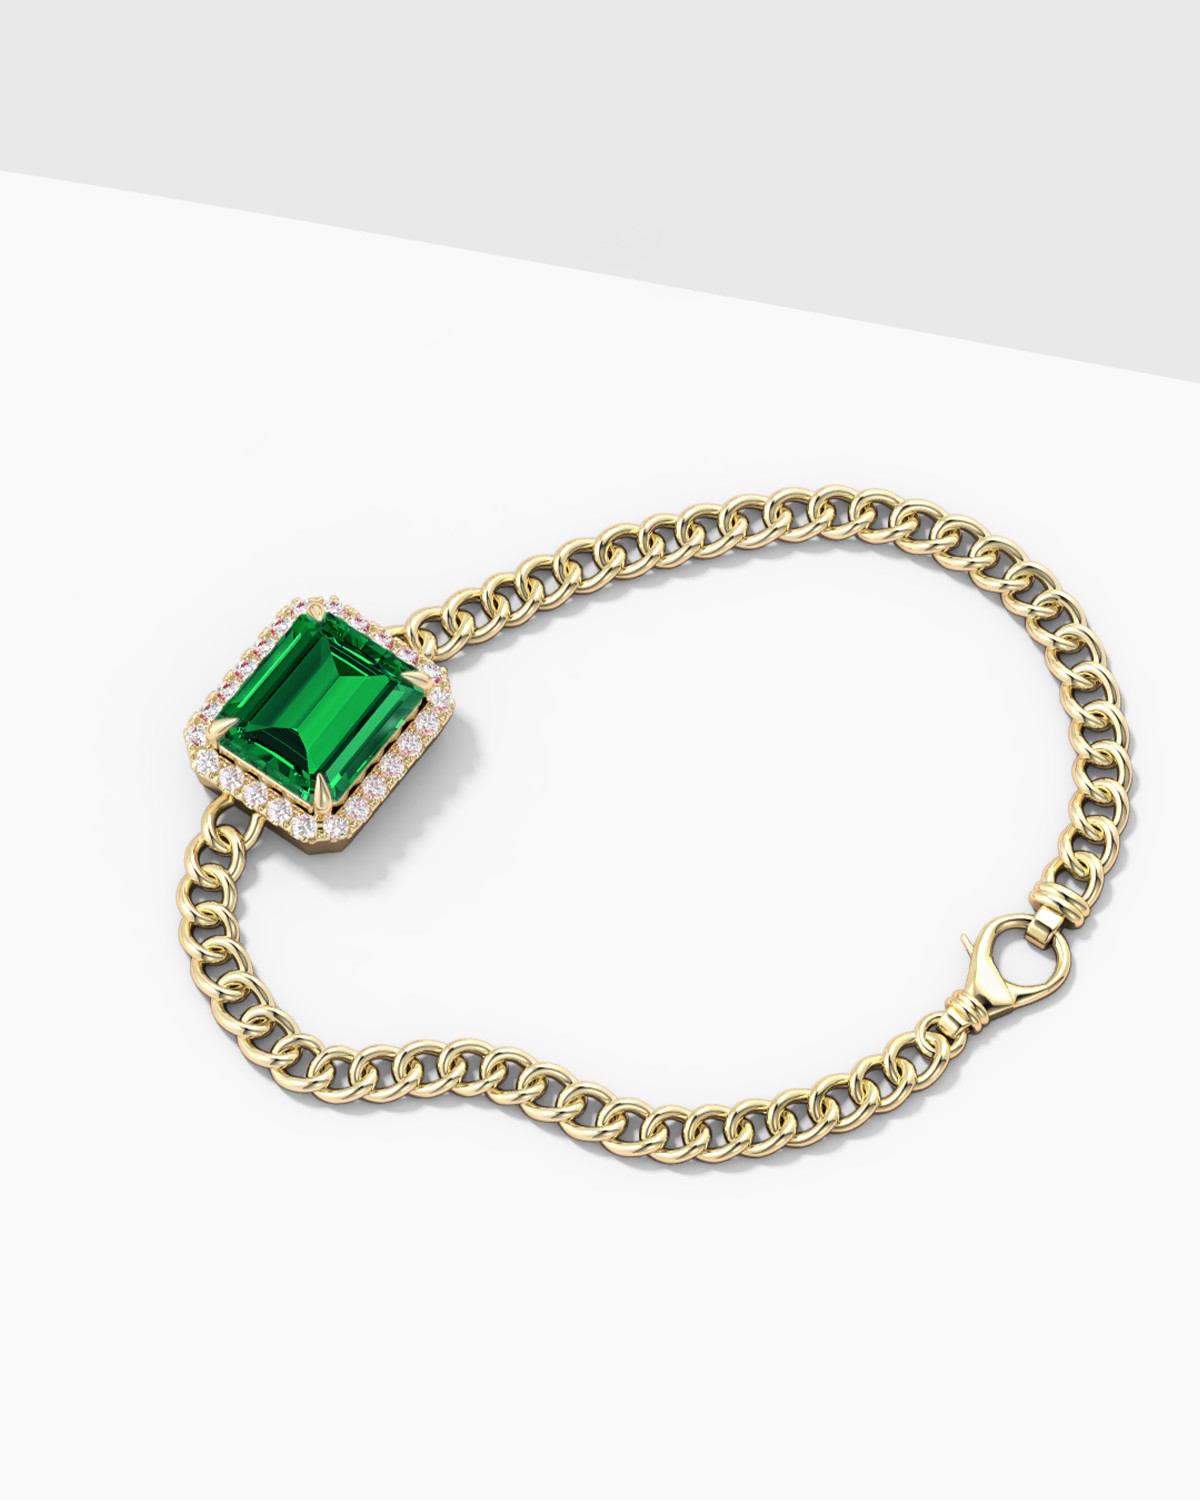 10 Lab-Grown Jewellery Pieces You Need in Your Daily Rotation